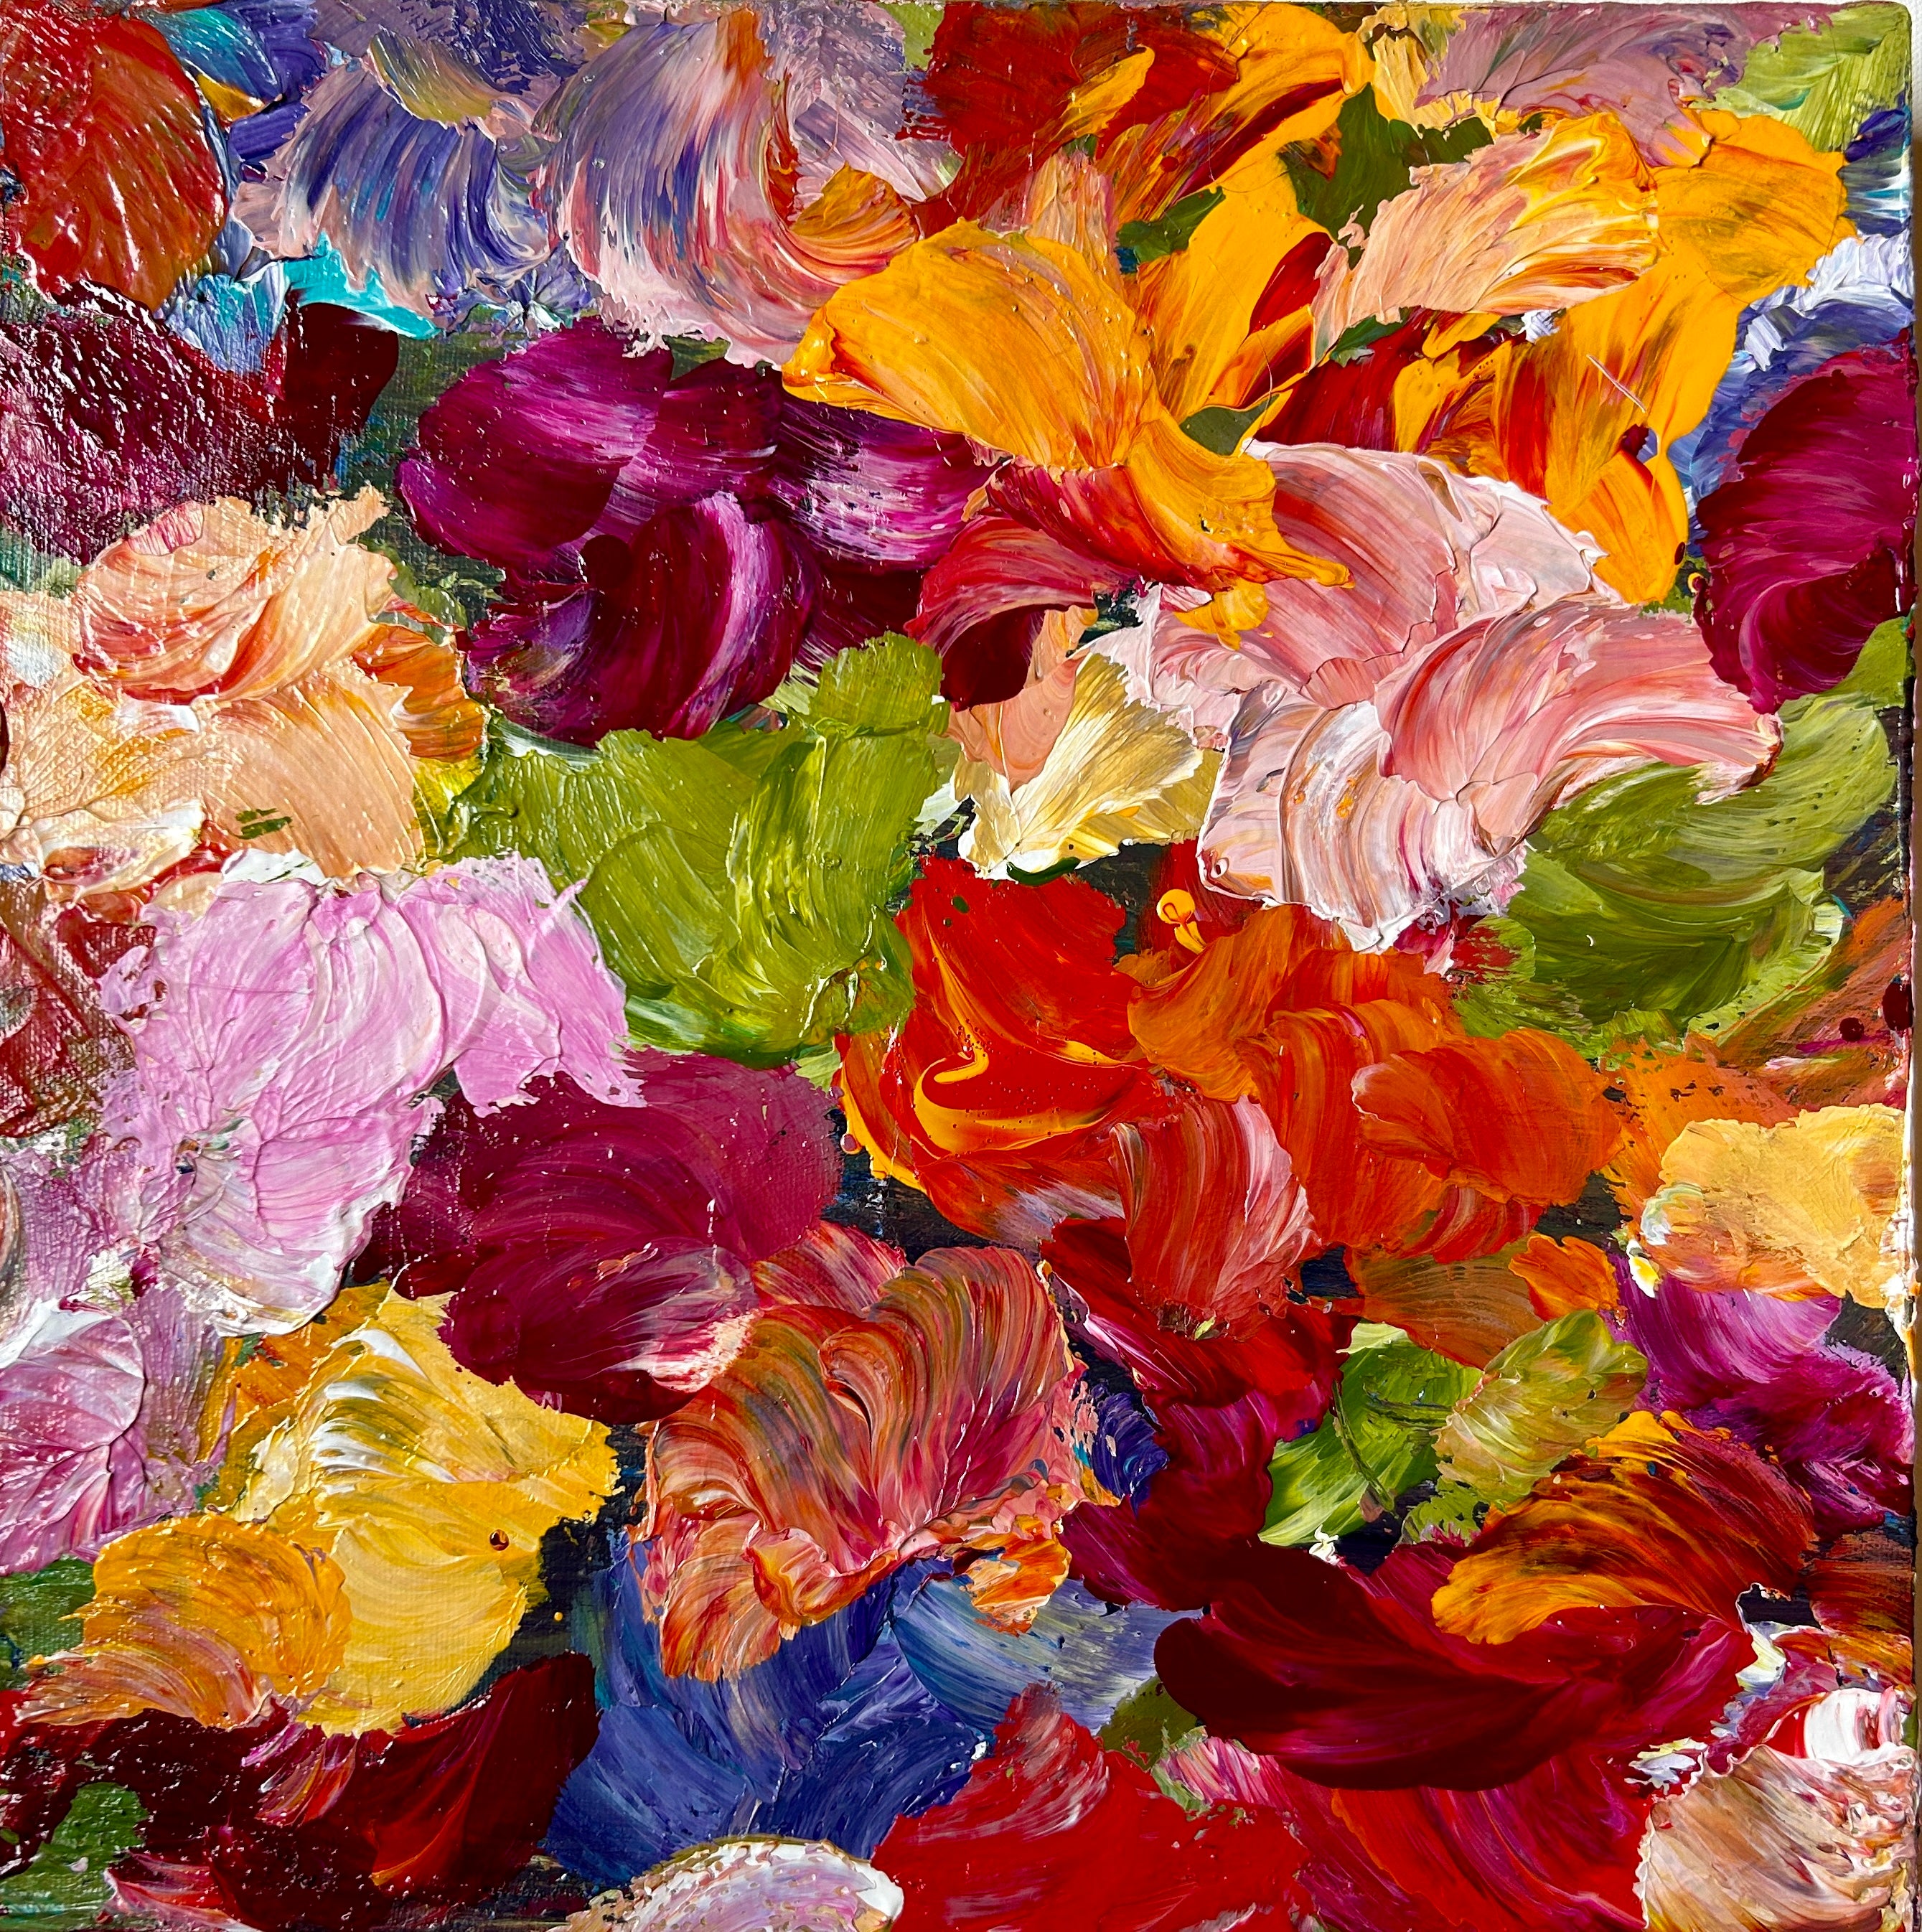 Floral Gardens.  Original acrylic painting by Ottawa-based artist Mireille Laroche, 14 by 14 inch on 1 .5 inch deep canvas